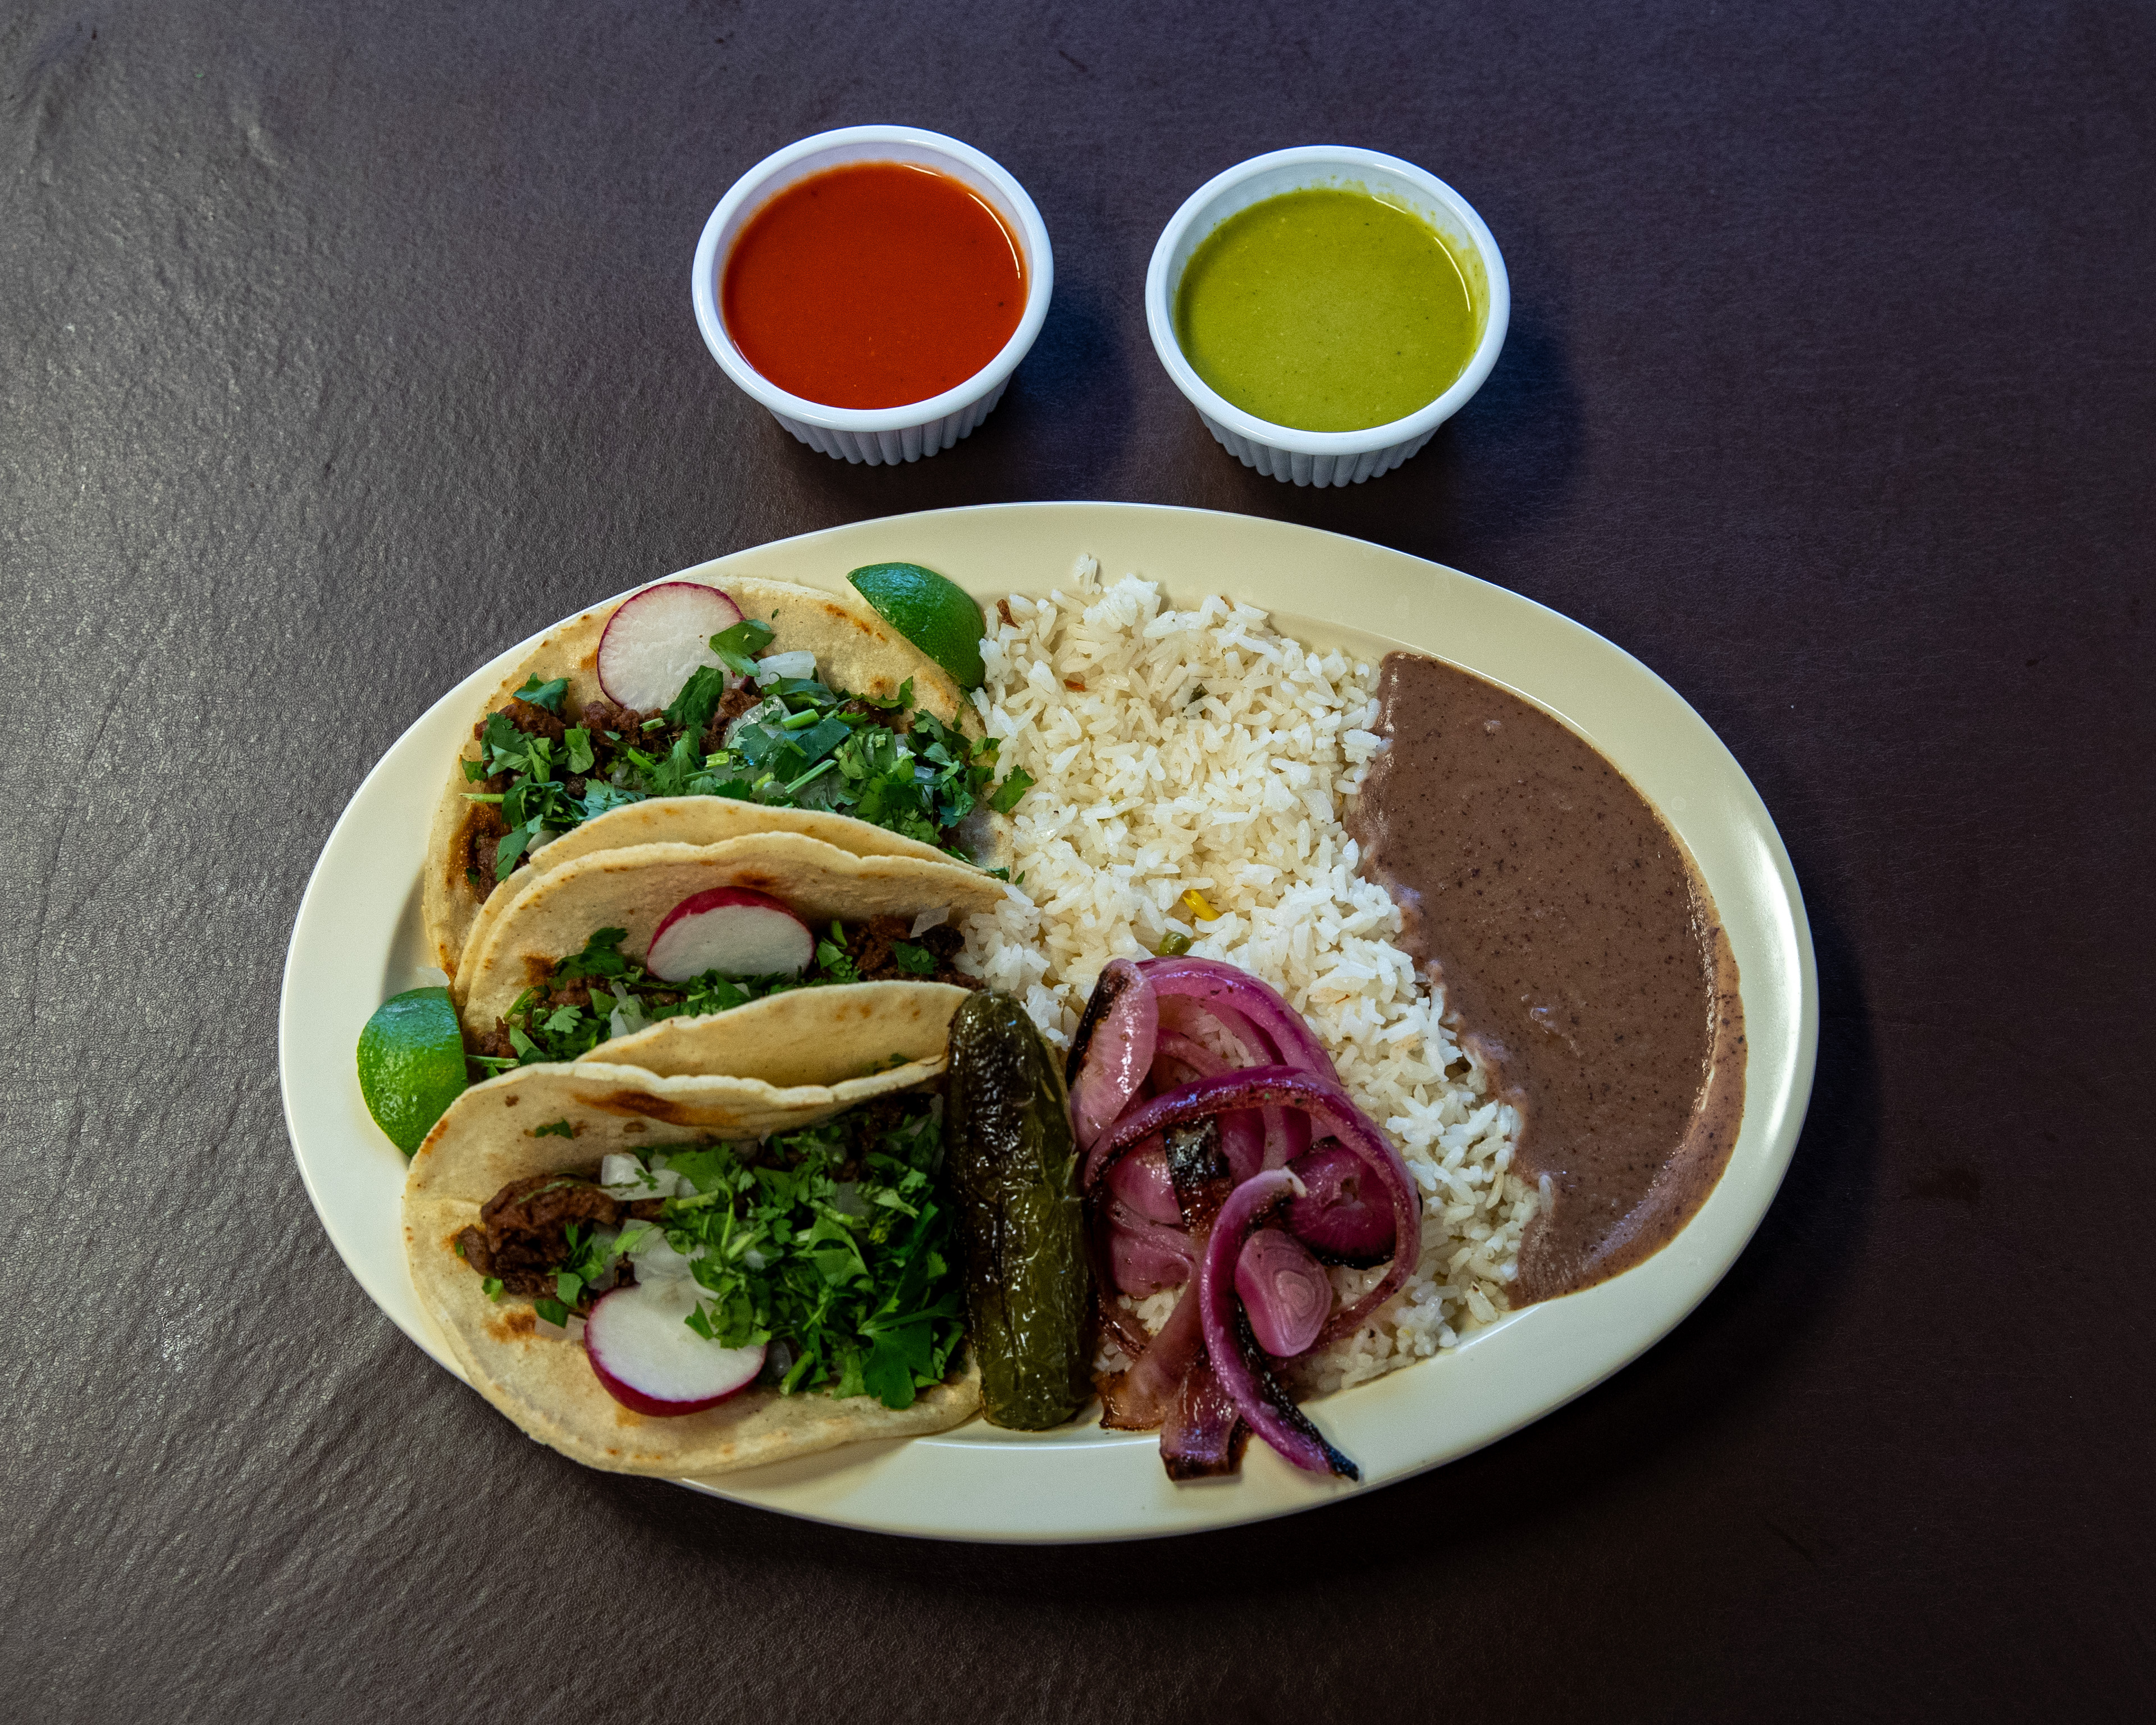 Three taco dinner with homemade tortillas, rice, beans, rice, jalapeño and onion for $14.99 at Pupuseria El Salvador in Wyoming on Thursday, Oct. 19, 2023. (Cory Morse | MLive.com)
